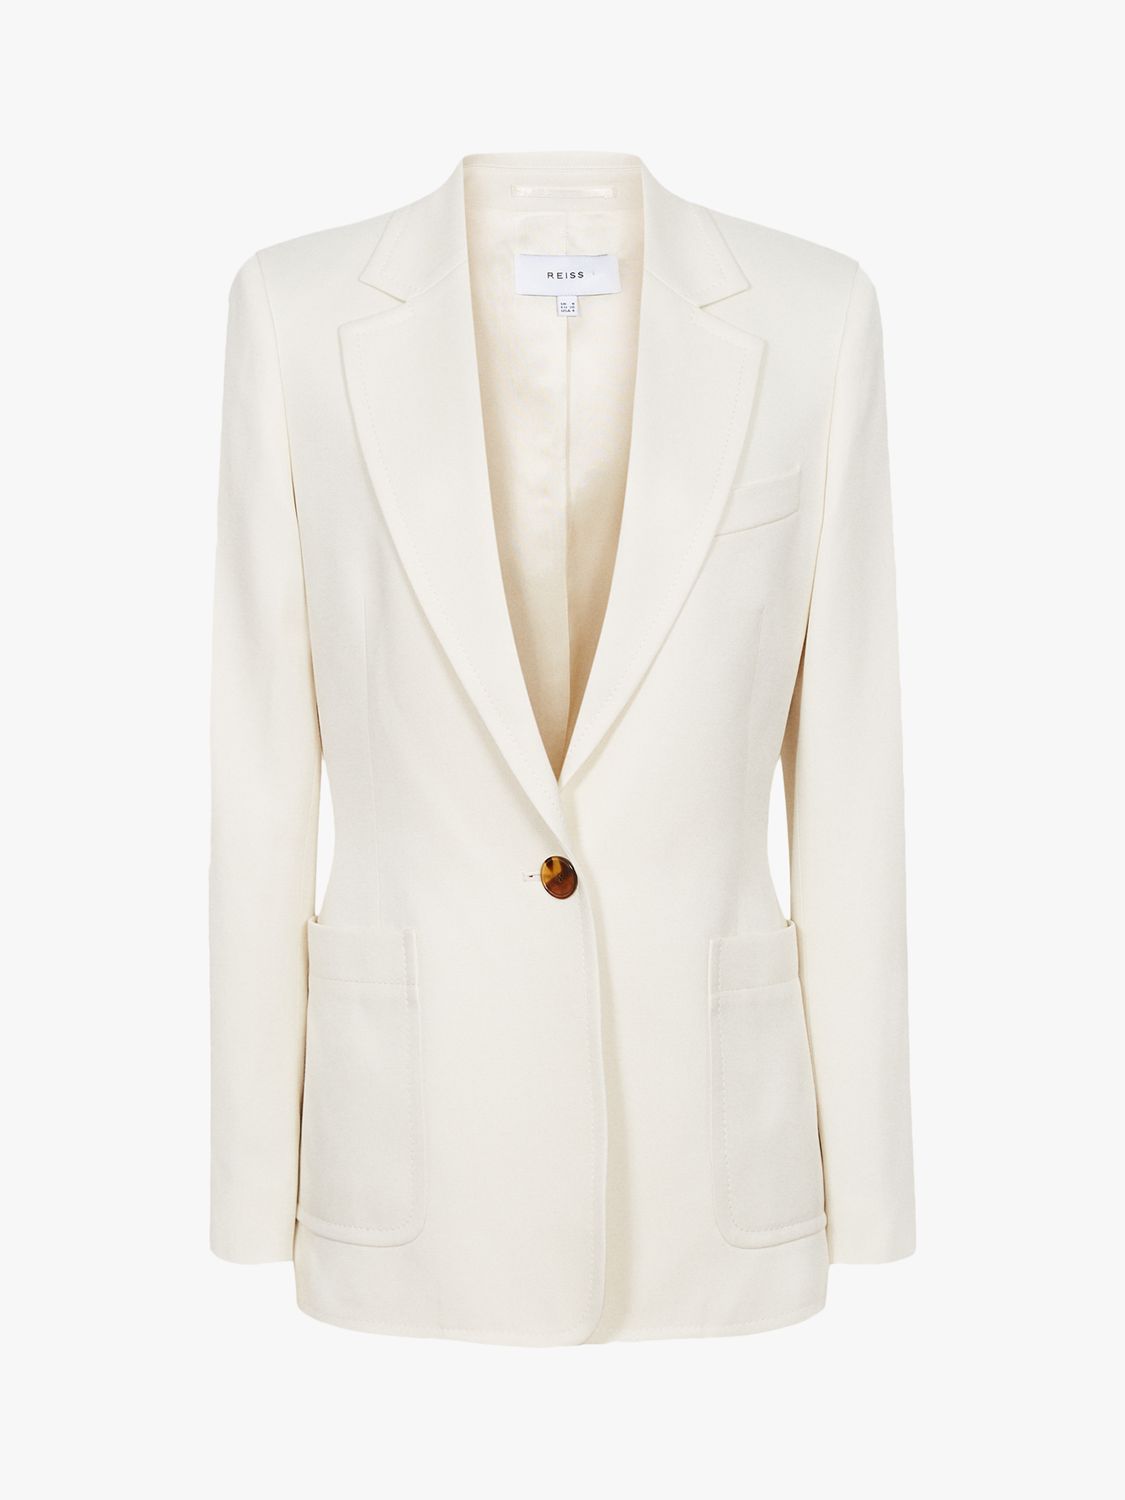 Reiss Ember Tailored Single Breasted Blazer, Cream at John Lewis & Partners